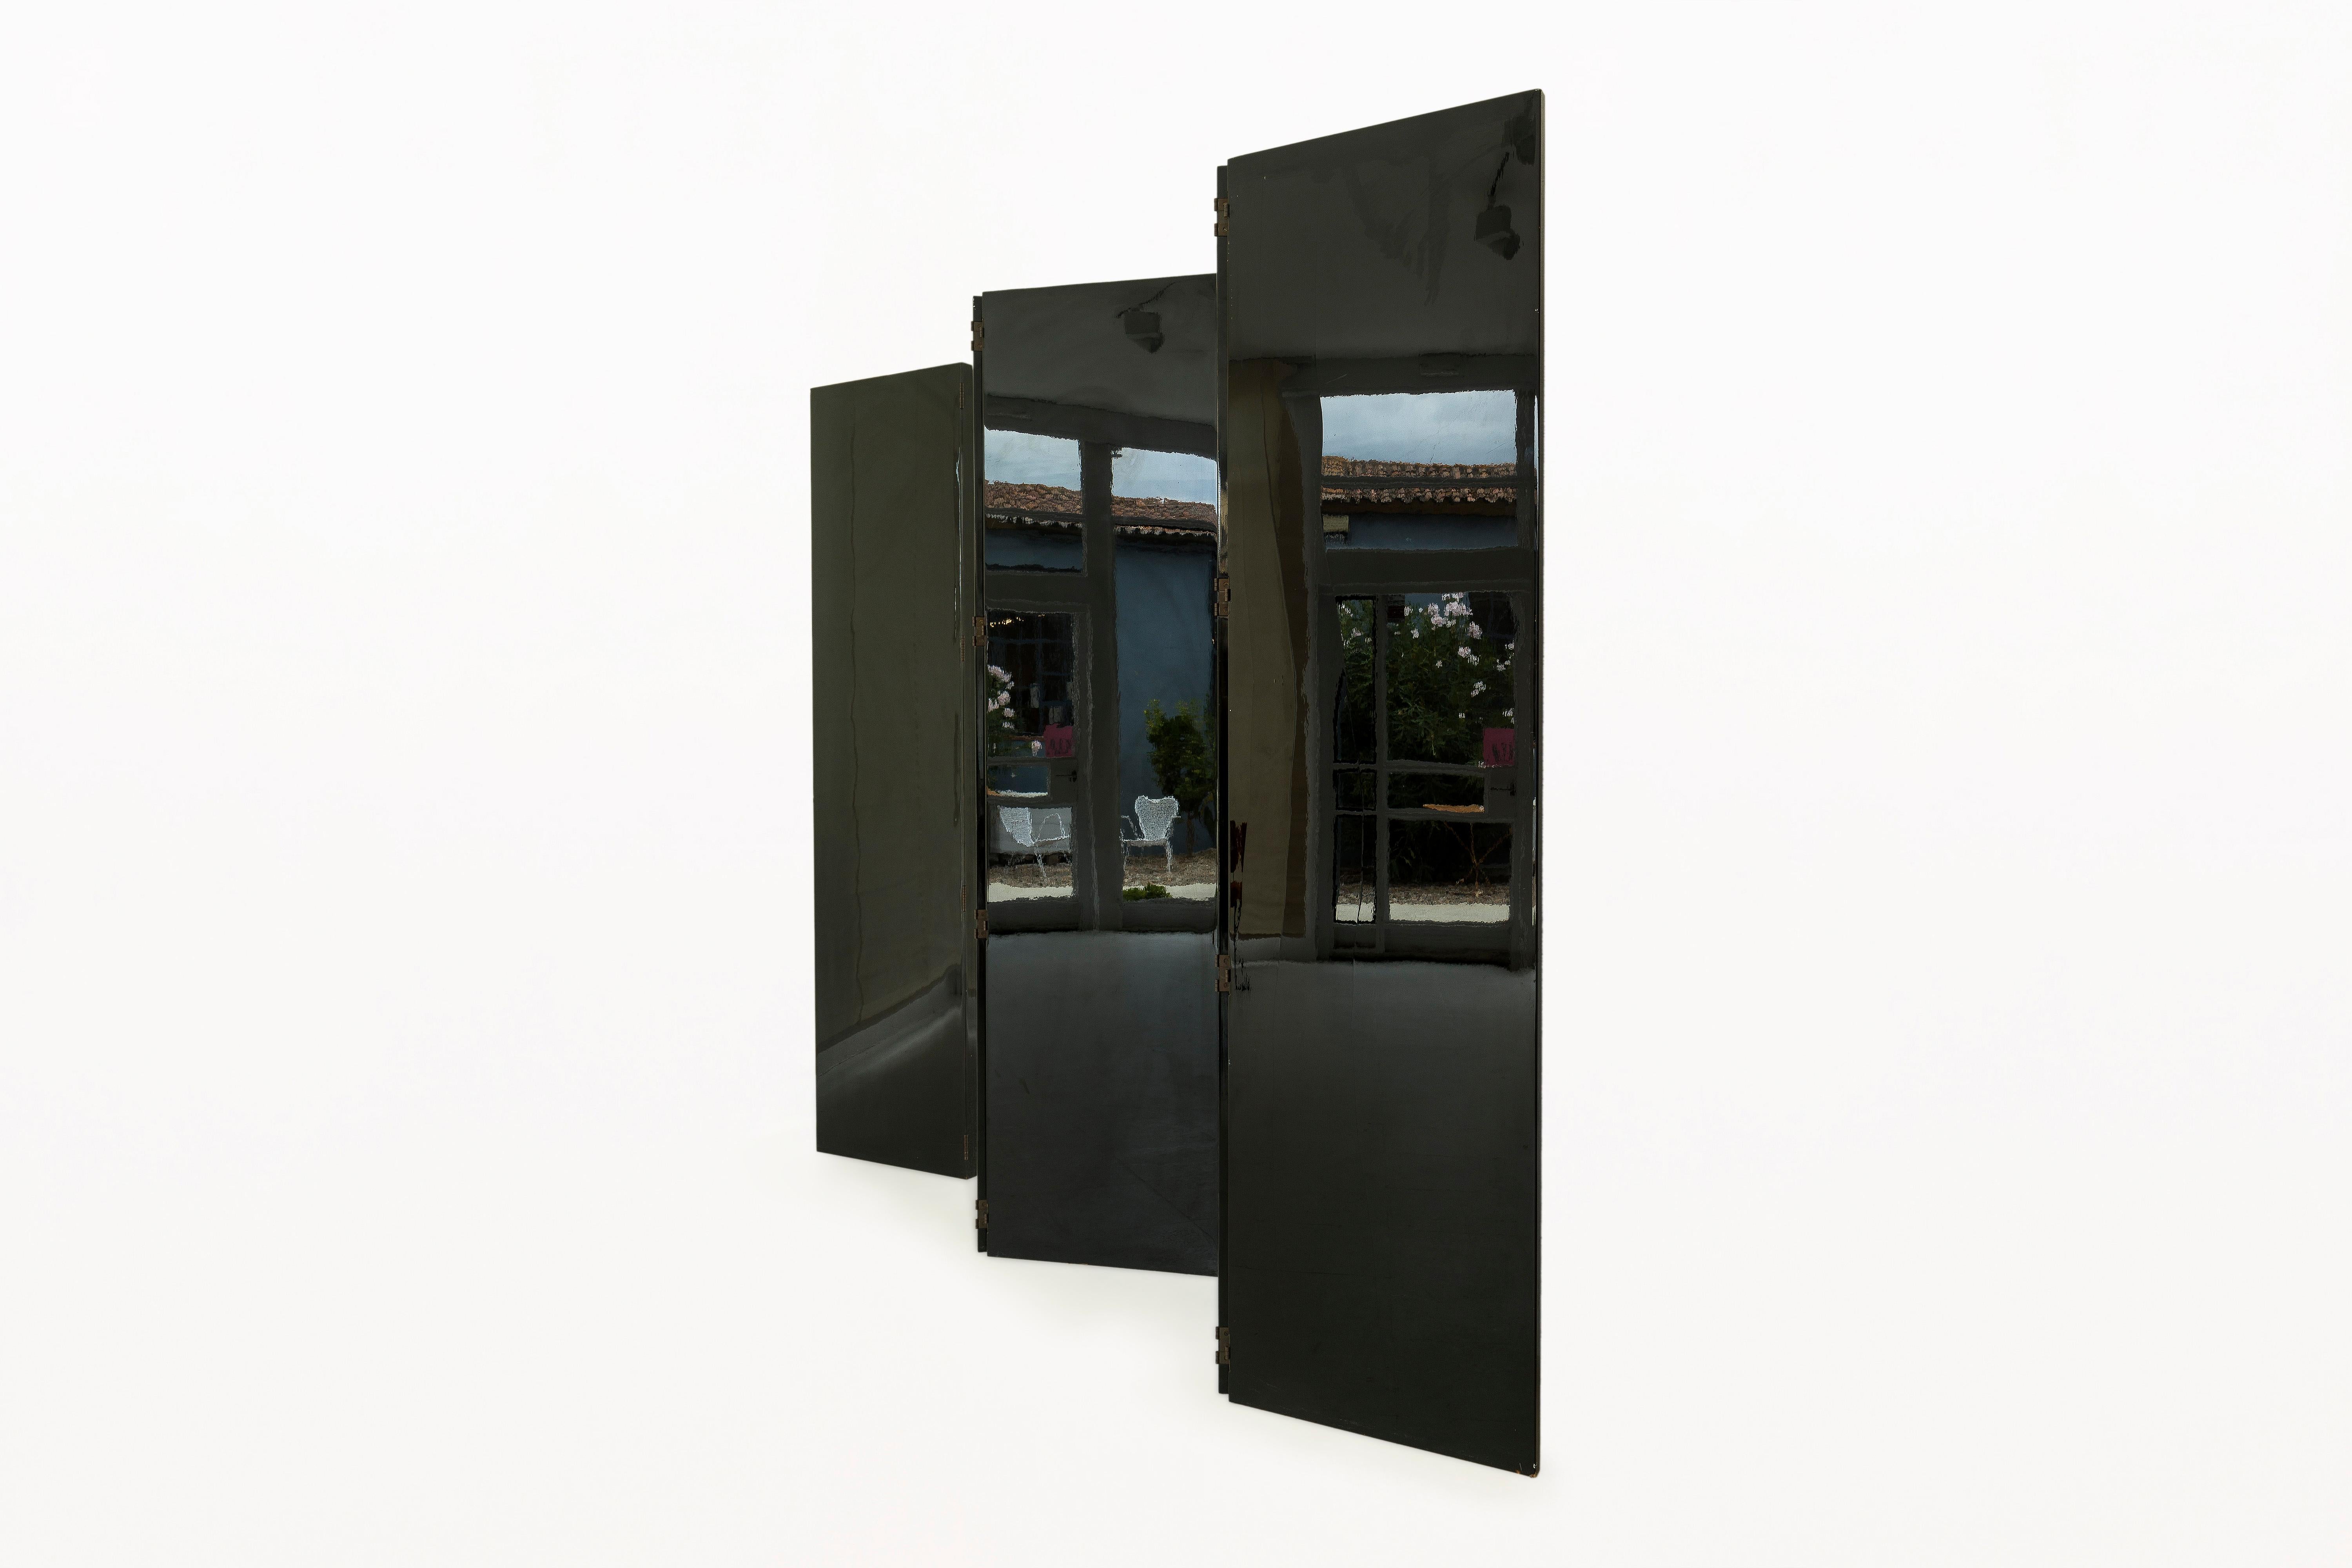 Pair of Screens.
Pair of black lacquered screens.
Beautiful example of Art Deco elegance
Each screen is made of 5 equal 19.5